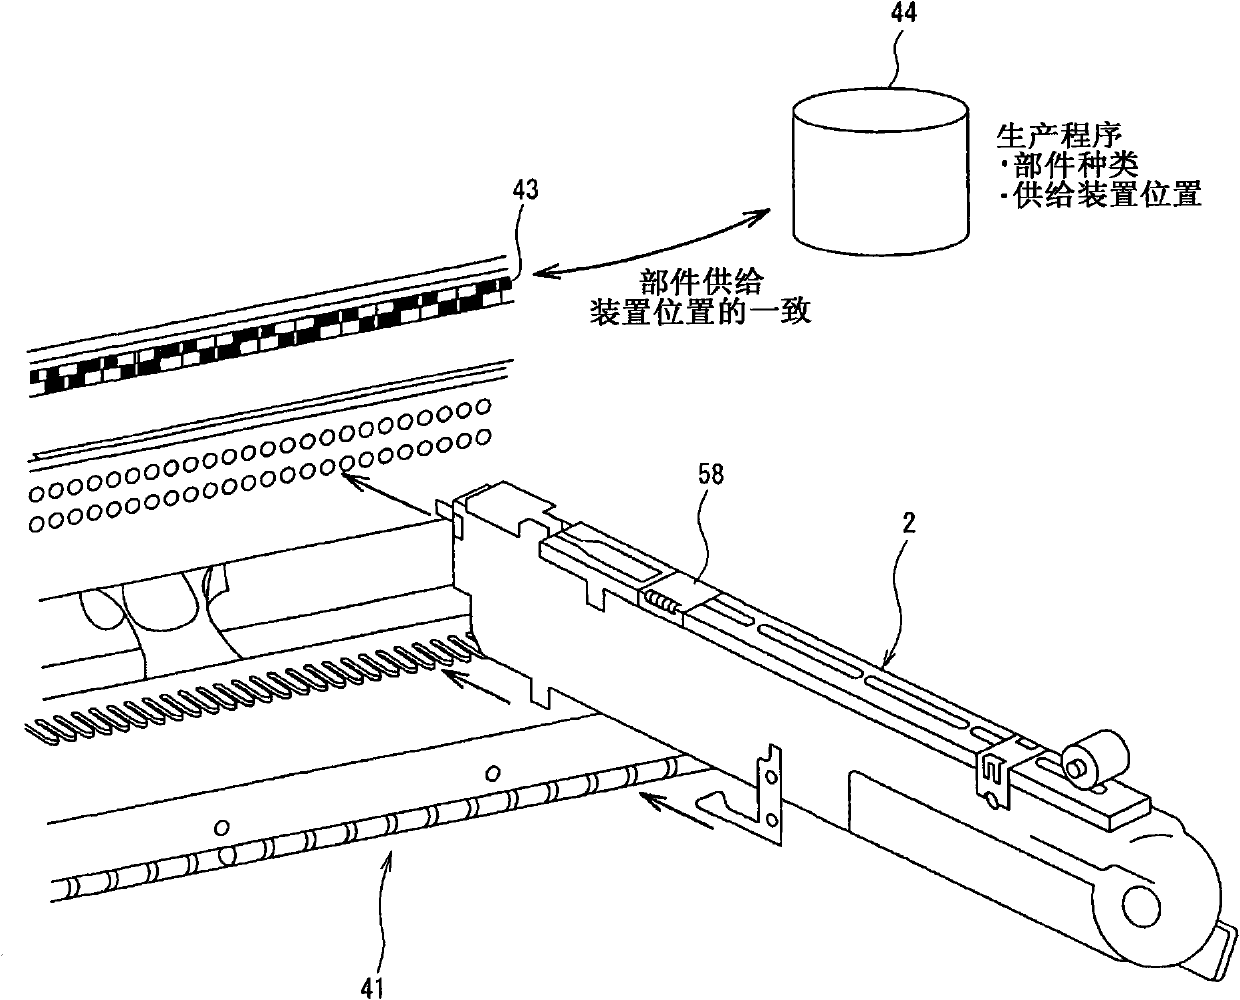 Part feeder for chip mounting device